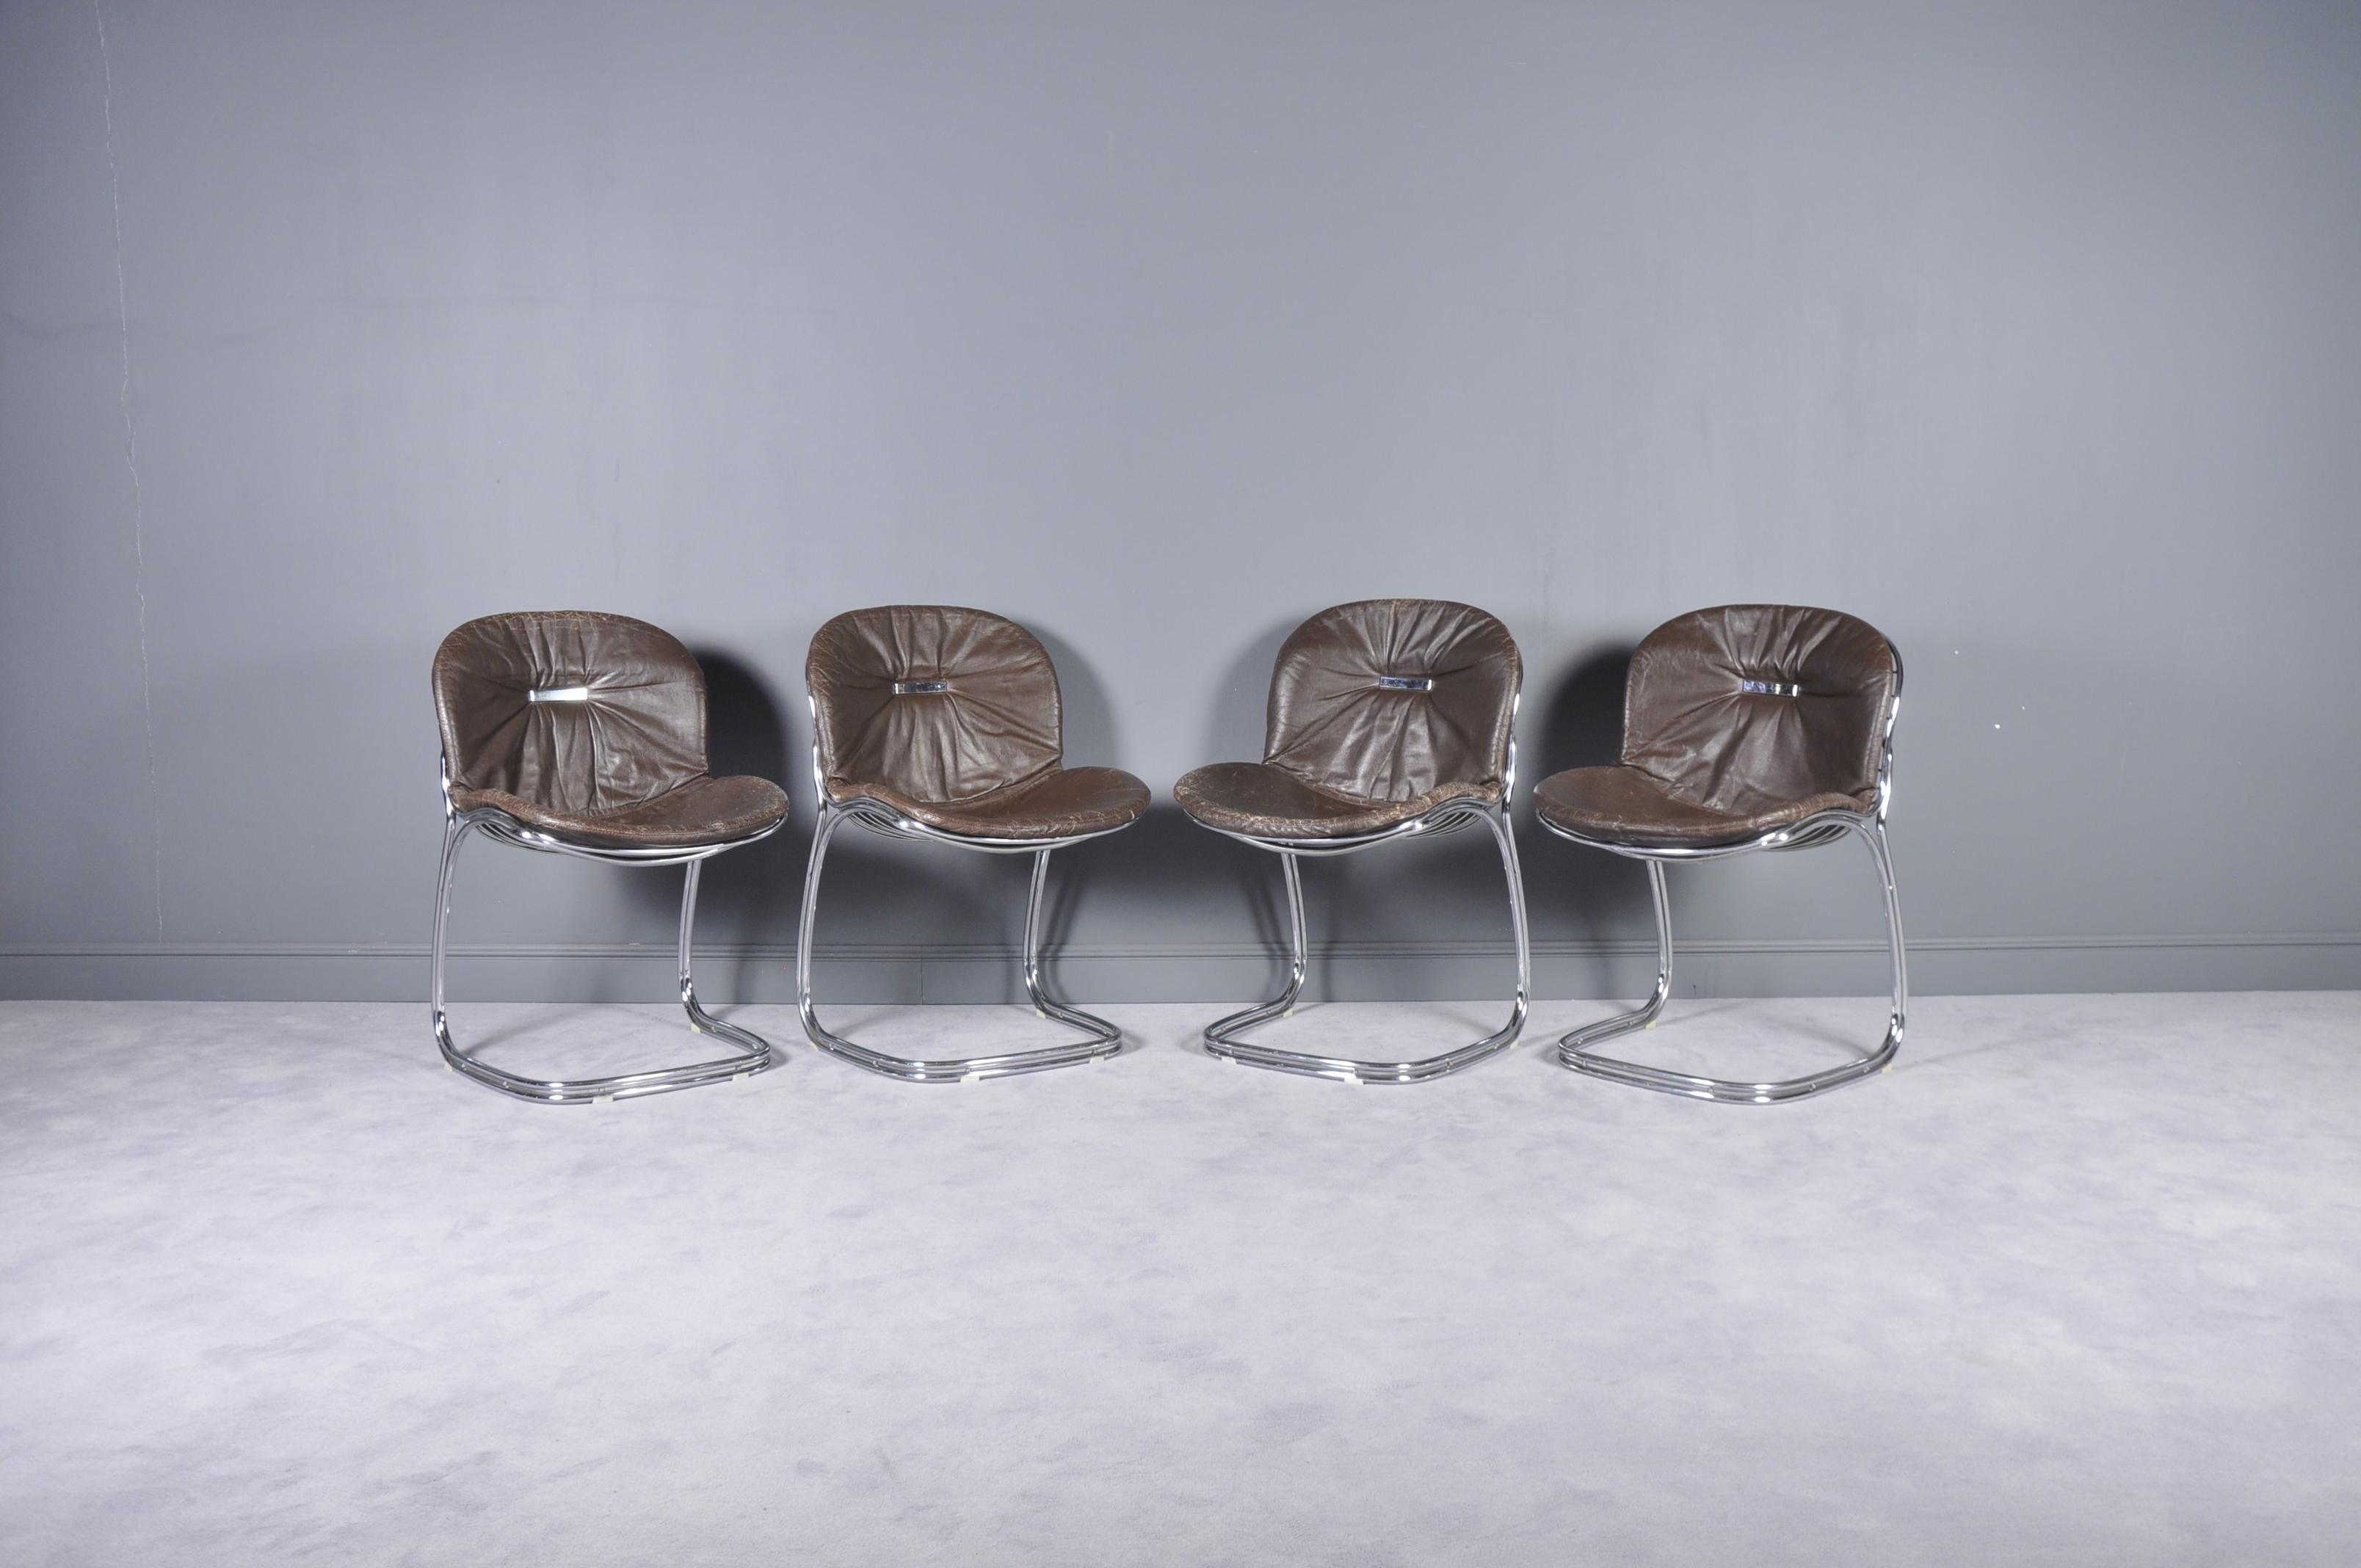 This set of four chairs, model Sabrina, was designed by Gastone Rinaldi for Rima in Padova, Italy during the 1970s. The cantilevered design features a chromed tubular steel frame and cushions covered with dark brown leatherette.